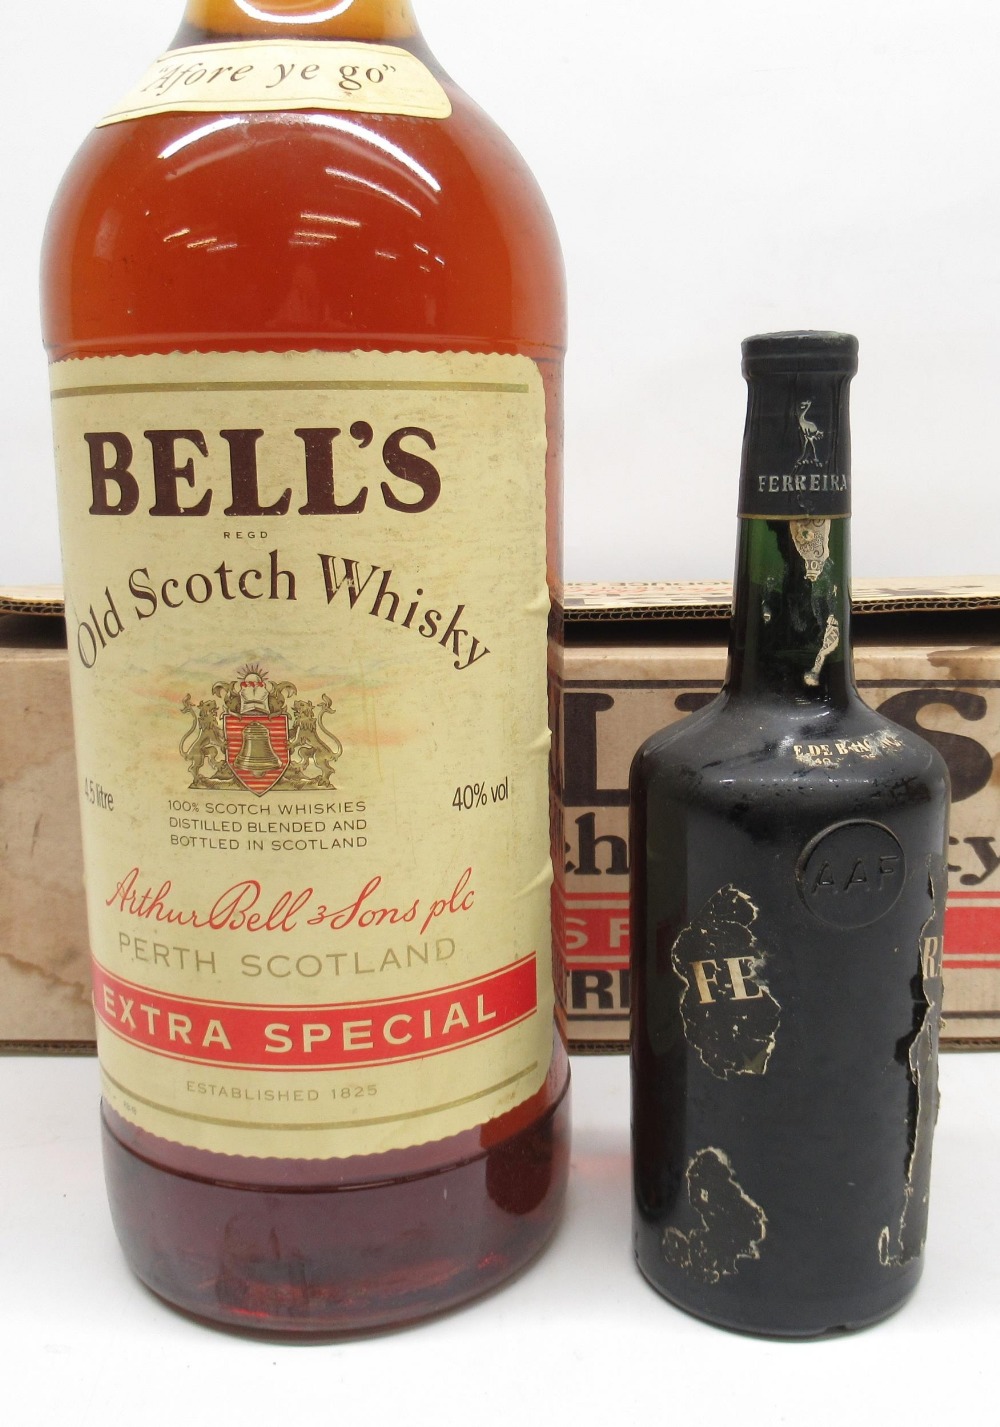 Ferreira 06400 1960 vintage port, unopened, and a gallon bottle of Bells old scotch whiskey - Image 2 of 2